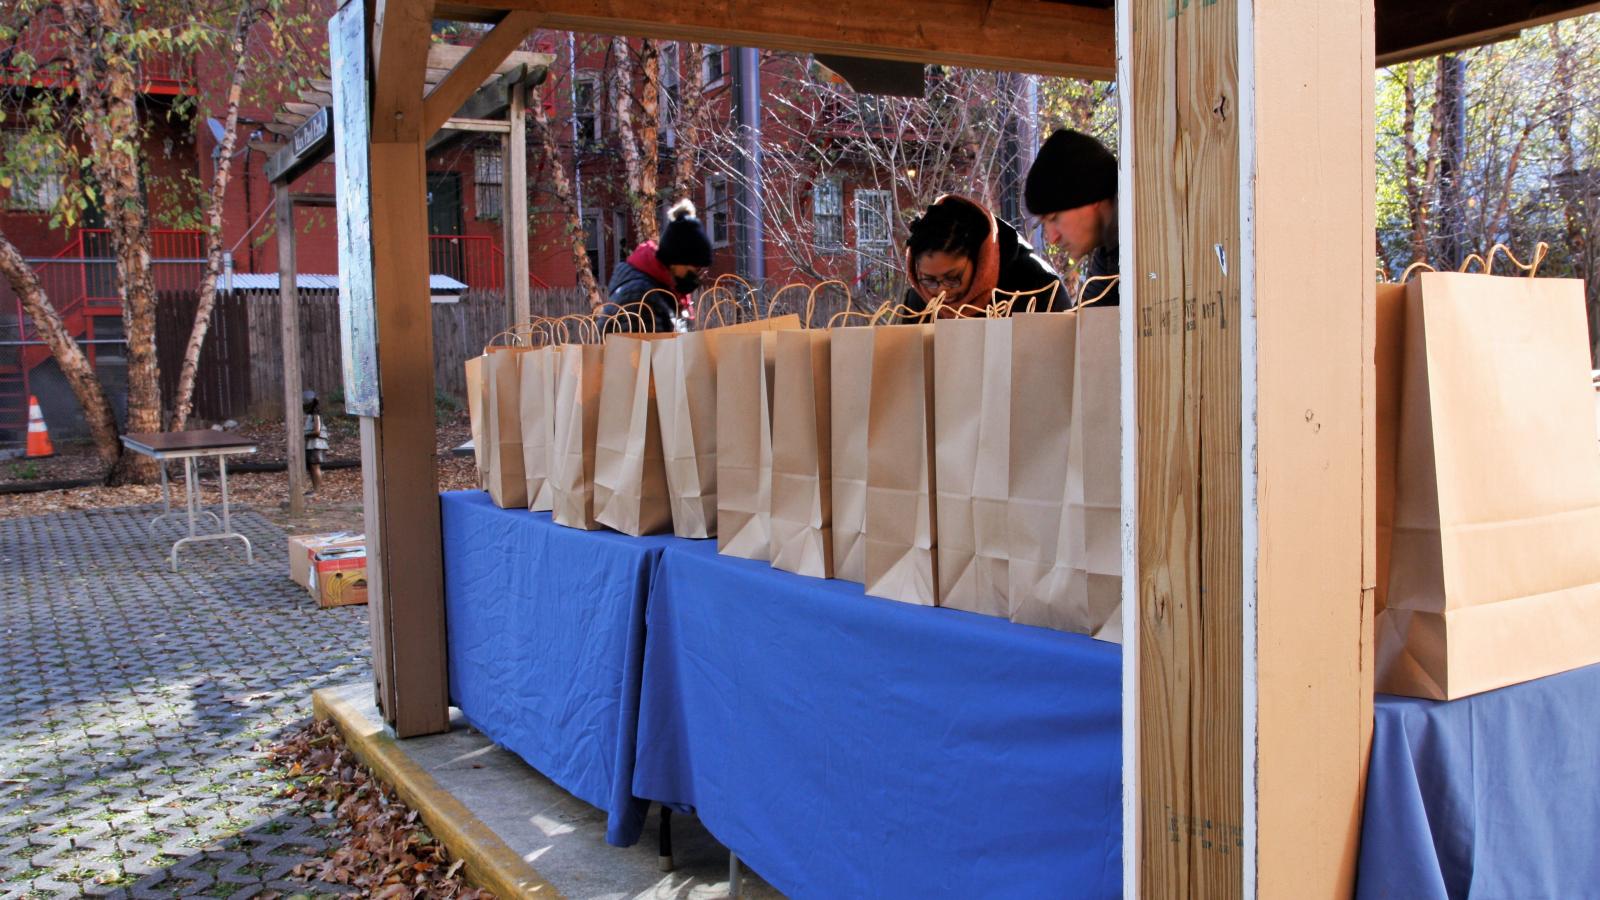 Bags of produce at farm-stand